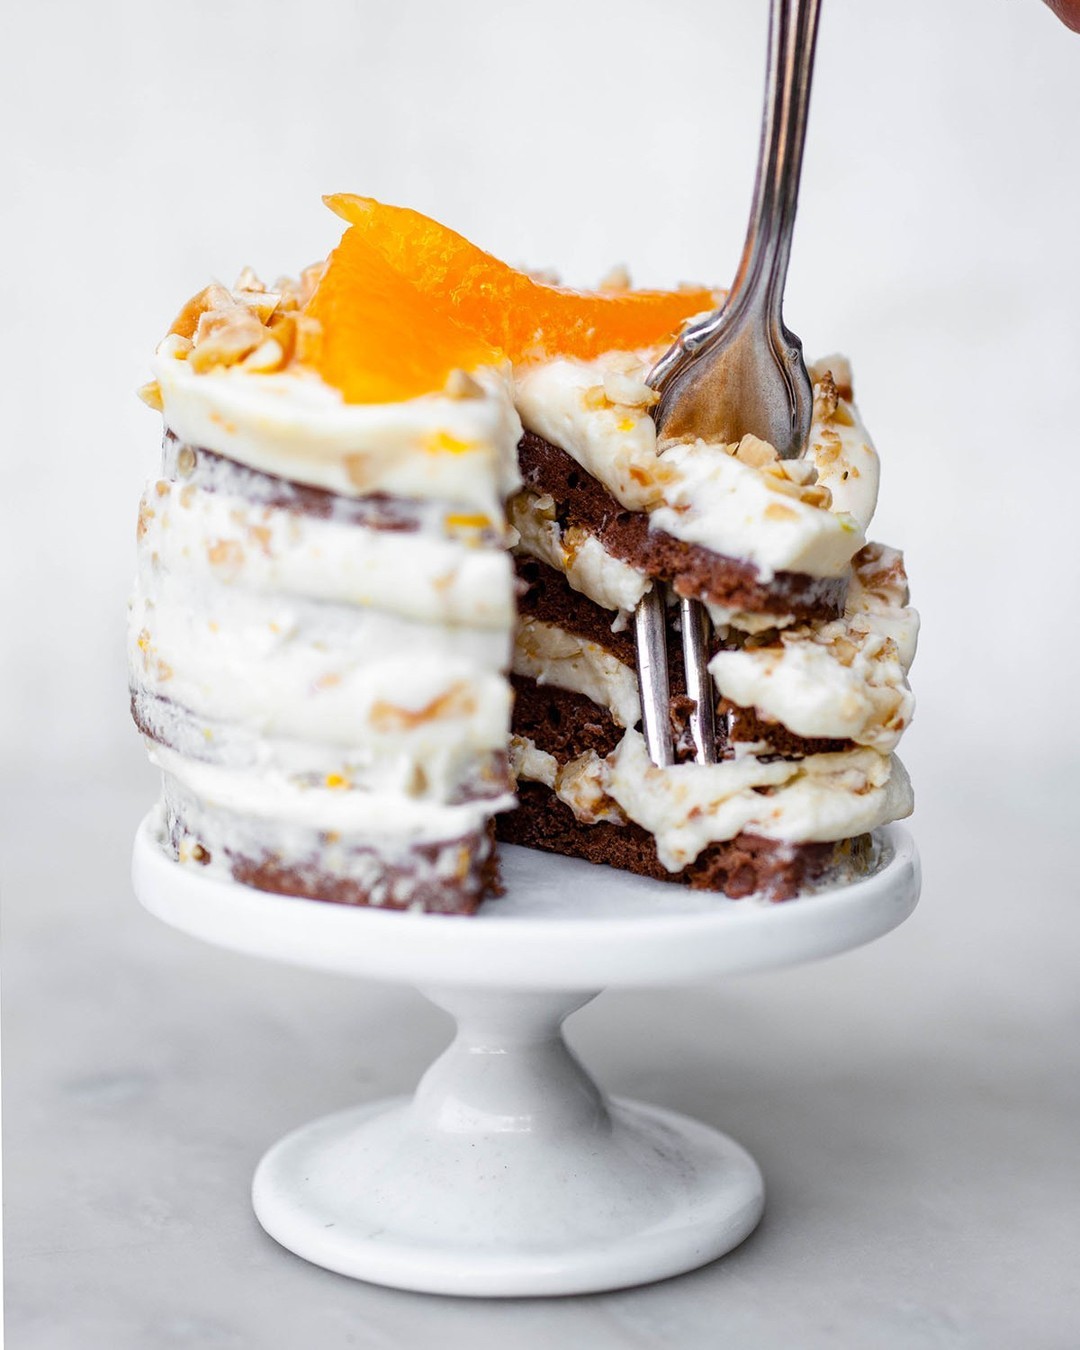 Chocolate Orange Tiramisu 😍 You love chocolate, you love tiramisu, so how could you not love Chocolate Tiramisu with Oranges and Hazelnuts? The perfect treat for any time of day🙌  Recipe is linked in our profile.